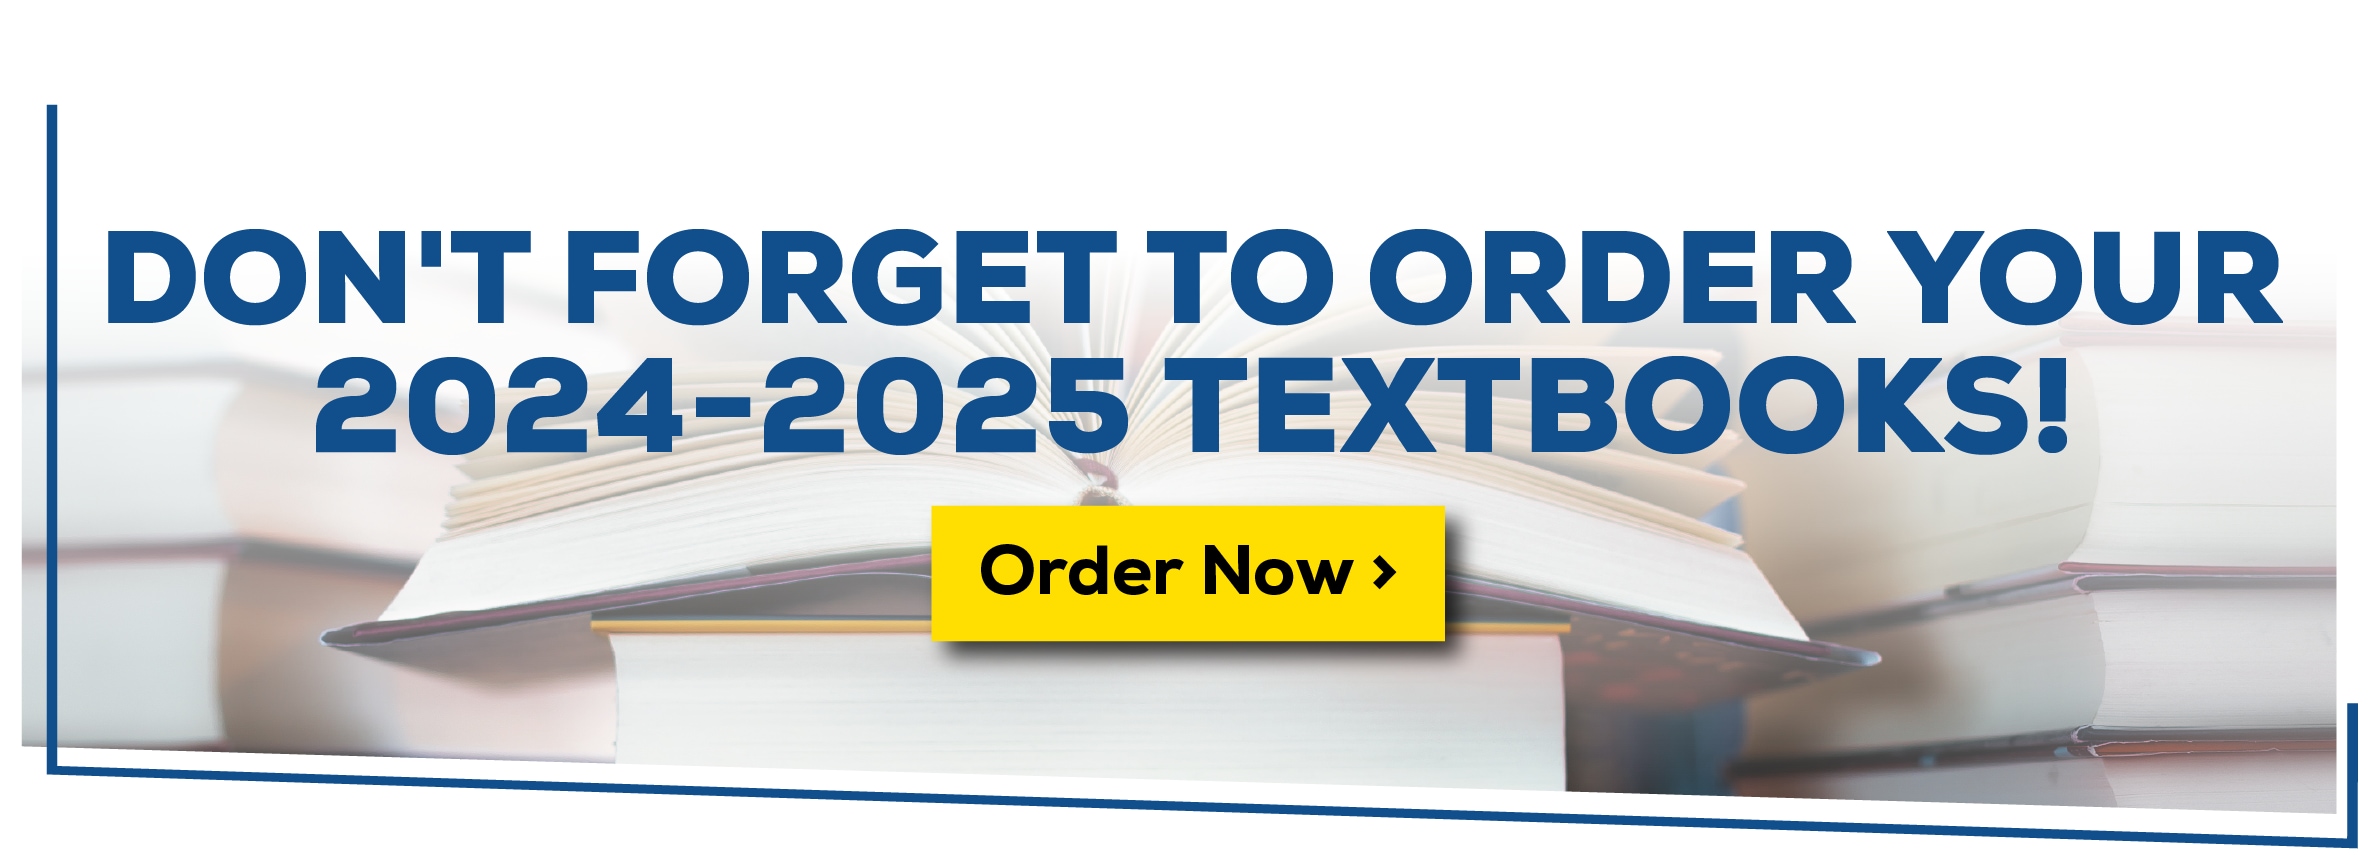 Don't forget to order your 2024-2025 textbooks. Order now.